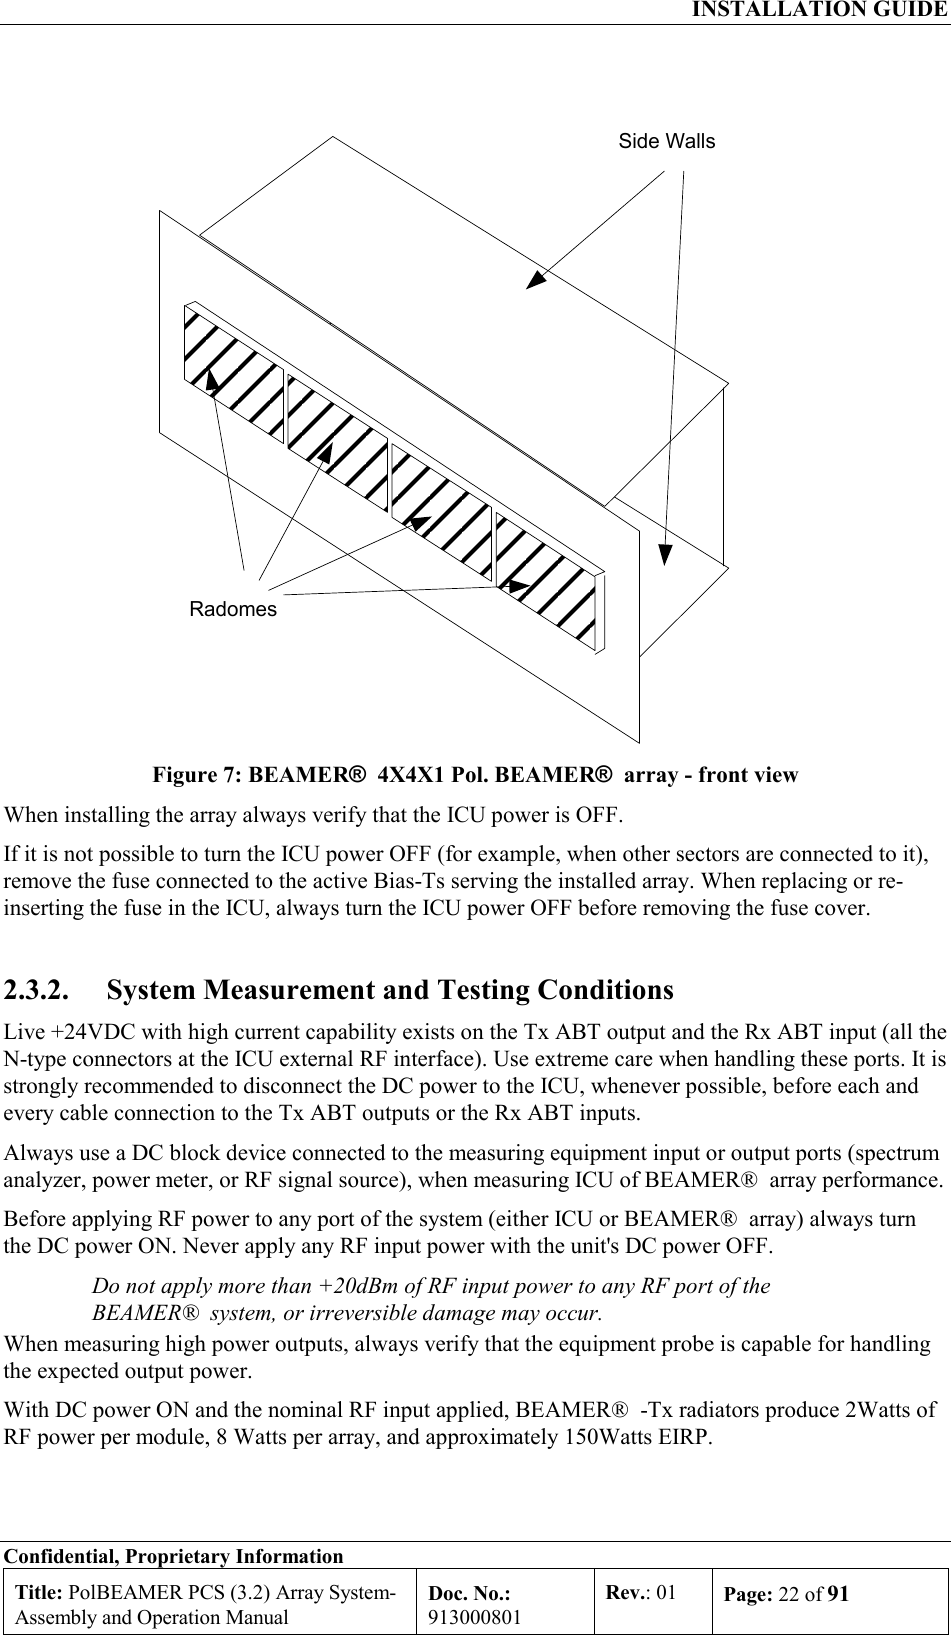  INSTALLATION GUIDE Confidential, Proprietary Information Title: PolBEAMER PCS (3.2) Array System- Assembly and Operation Manual Doc. No.: 913000801 Rev.: 01  Page: 22 of 91  RadomesSide Walls Figure 7: BEAMER®  4X4X1 Pol. BEAMER®  array - front view When installing the array always verify that the ICU power is OFF.  If it is not possible to turn the ICU power OFF (for example, when other sectors are connected to it), remove the fuse connected to the active Bias-Ts serving the installed array. When replacing or re-inserting the fuse in the ICU, always turn the ICU power OFF before removing the fuse cover. 2.3.2.  System Measurement and Testing Conditions Live +24VDC with high current capability exists on the Tx ABT output and the Rx ABT input (all the N-type connectors at the ICU external RF interface). Use extreme care when handling these ports. It is strongly recommended to disconnect the DC power to the ICU, whenever possible, before each and every cable connection to the Tx ABT outputs or the Rx ABT inputs. Always use a DC block device connected to the measuring equipment input or output ports (spectrum analyzer, power meter, or RF signal source), when measuring ICU of BEAMER®  array performance.  Before applying RF power to any port of the system (either ICU or BEAMER®  array) always turn the DC power ON. Never apply any RF input power with the unit&apos;s DC power OFF. Do not apply more than +20dBm of RF input power to any RF port of the BEAMER®  system, or irreversible damage may occur. When measuring high power outputs, always verify that the equipment probe is capable for handling the expected output power. With DC power ON and the nominal RF input applied, BEAMER®  -Tx radiators produce 2Watts of RF power per module, 8 Watts per array, and approximately 150Watts EIRP.  